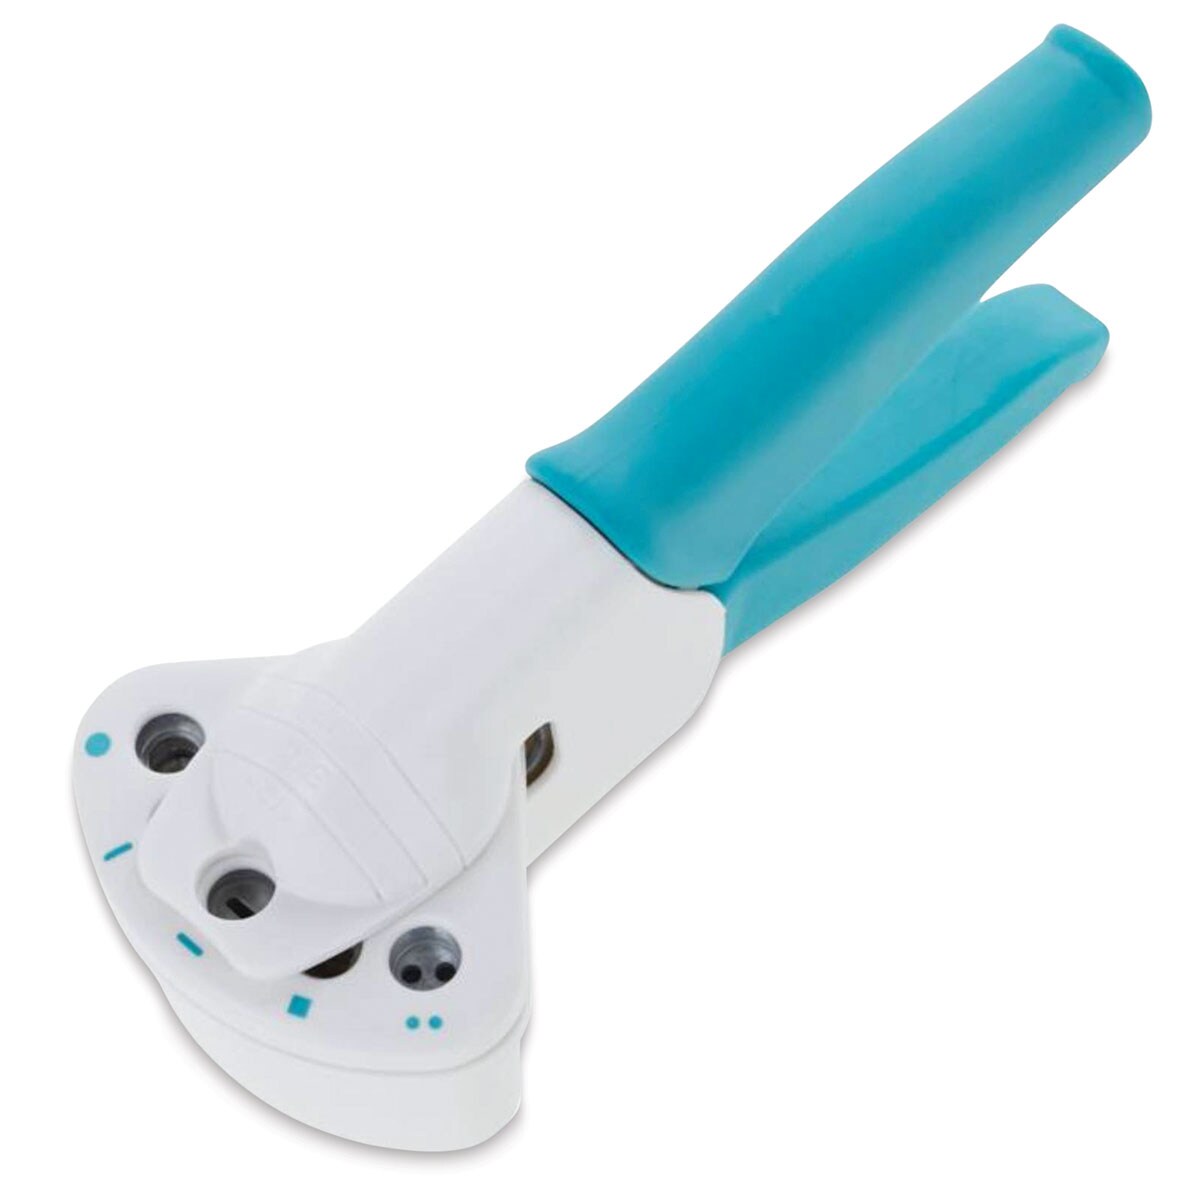 We R Memory Keepers Crop-A-Dile Multi-Hole Punch - Utility Punch